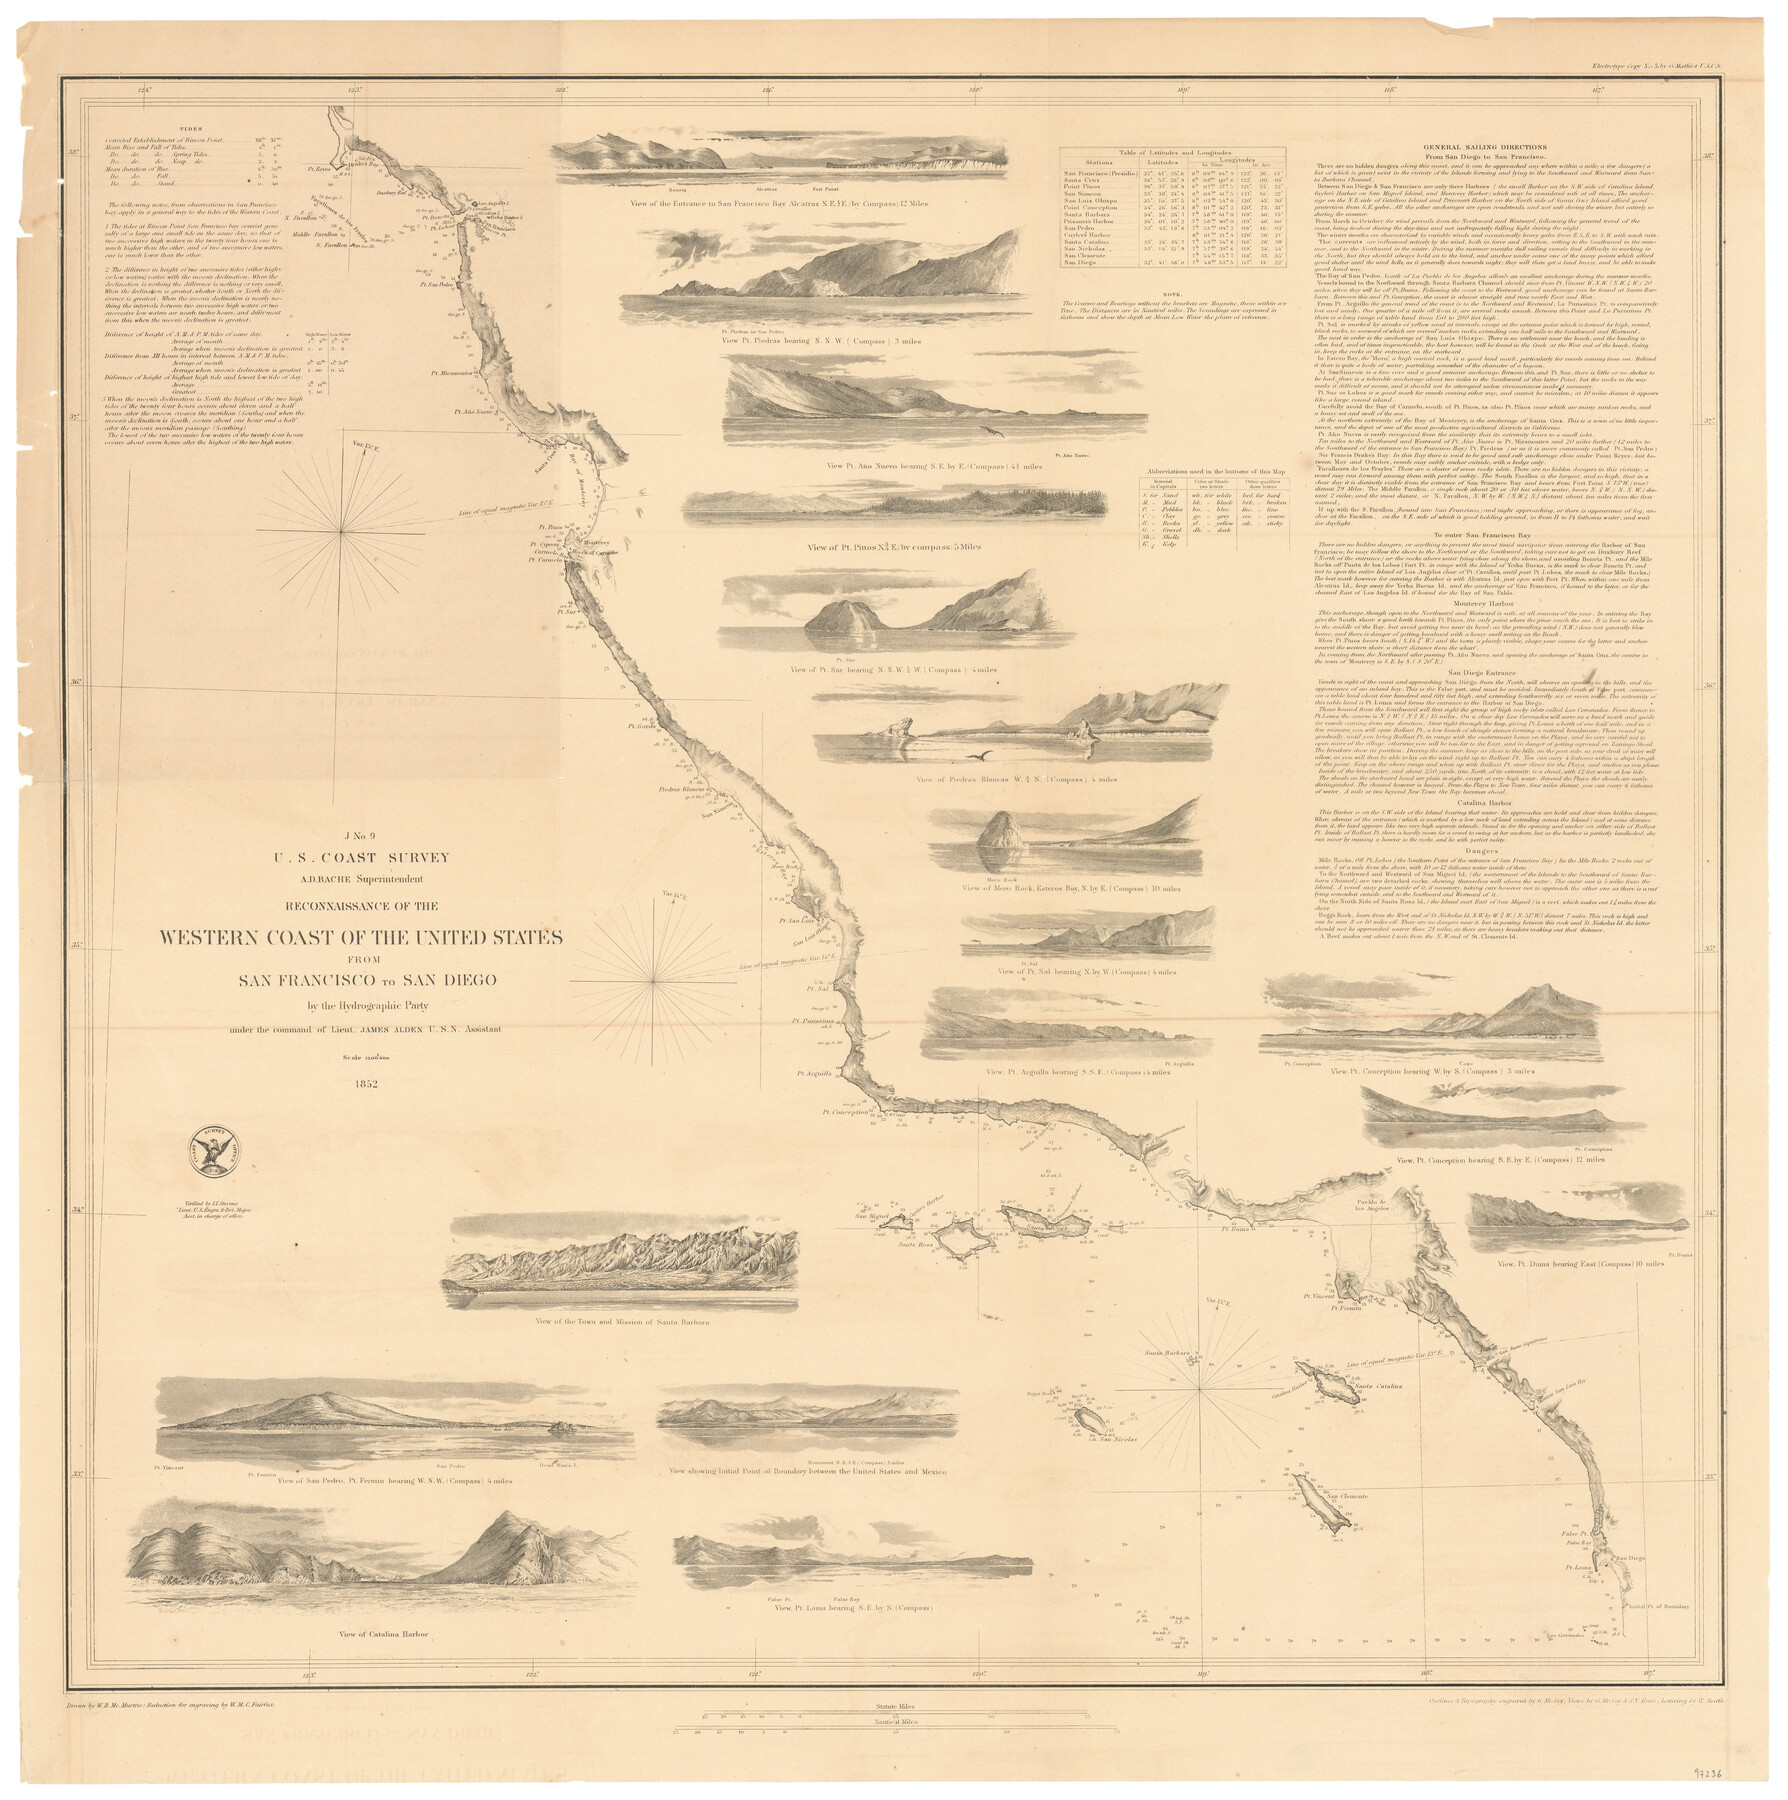 97236, J No. 9 - Reconnaissance of the Western Coast of the United States from San Francisco to San Diego, General Map Collection